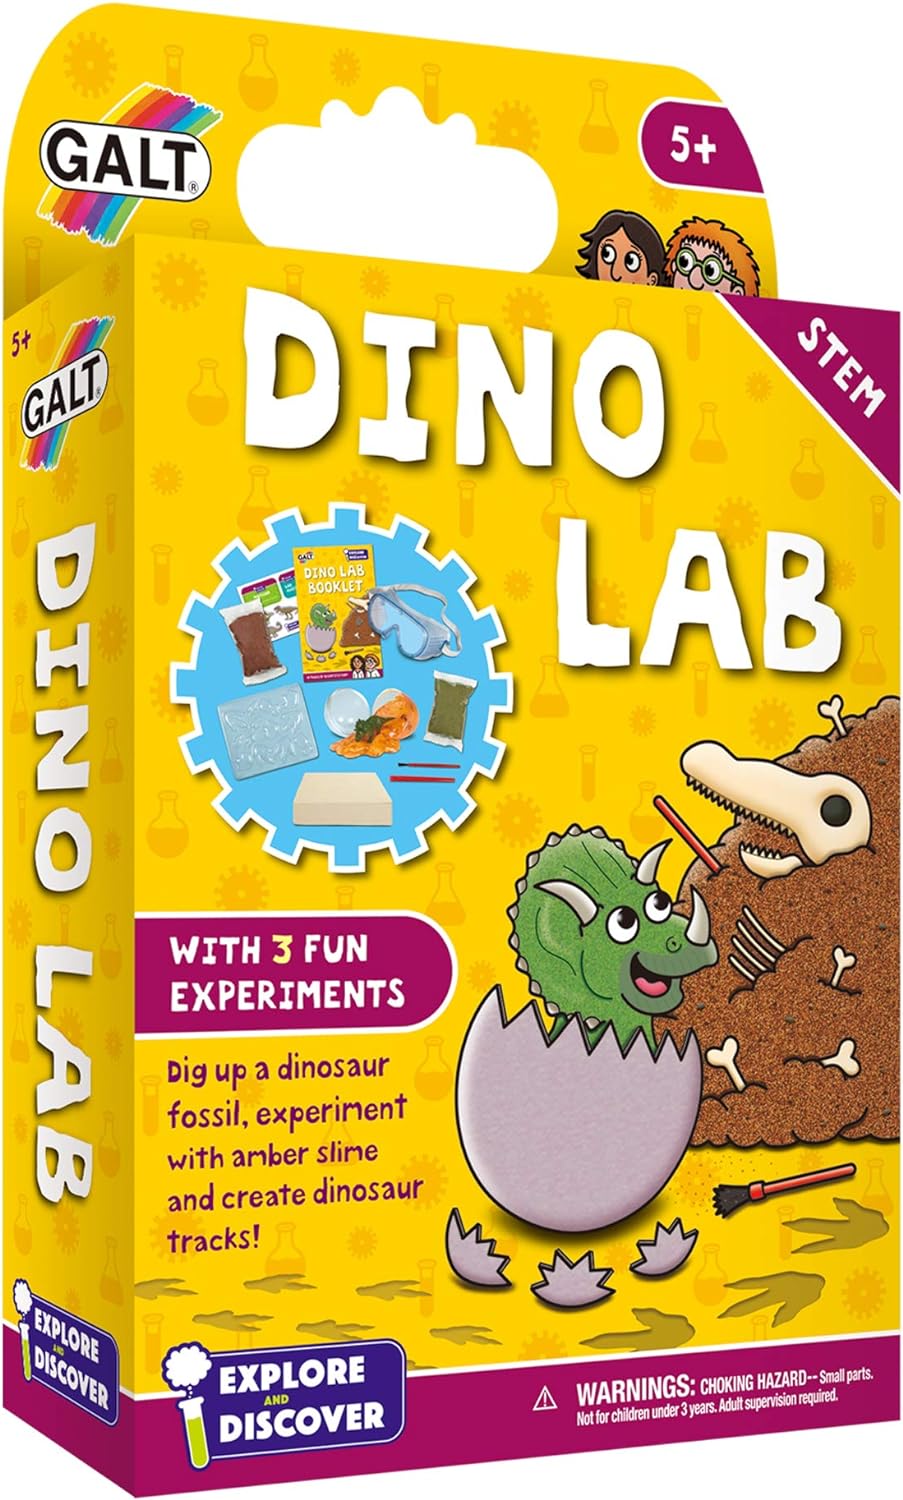 Galt, Dino Lab, Science Kit for Kids, Ages 5 Years Plus